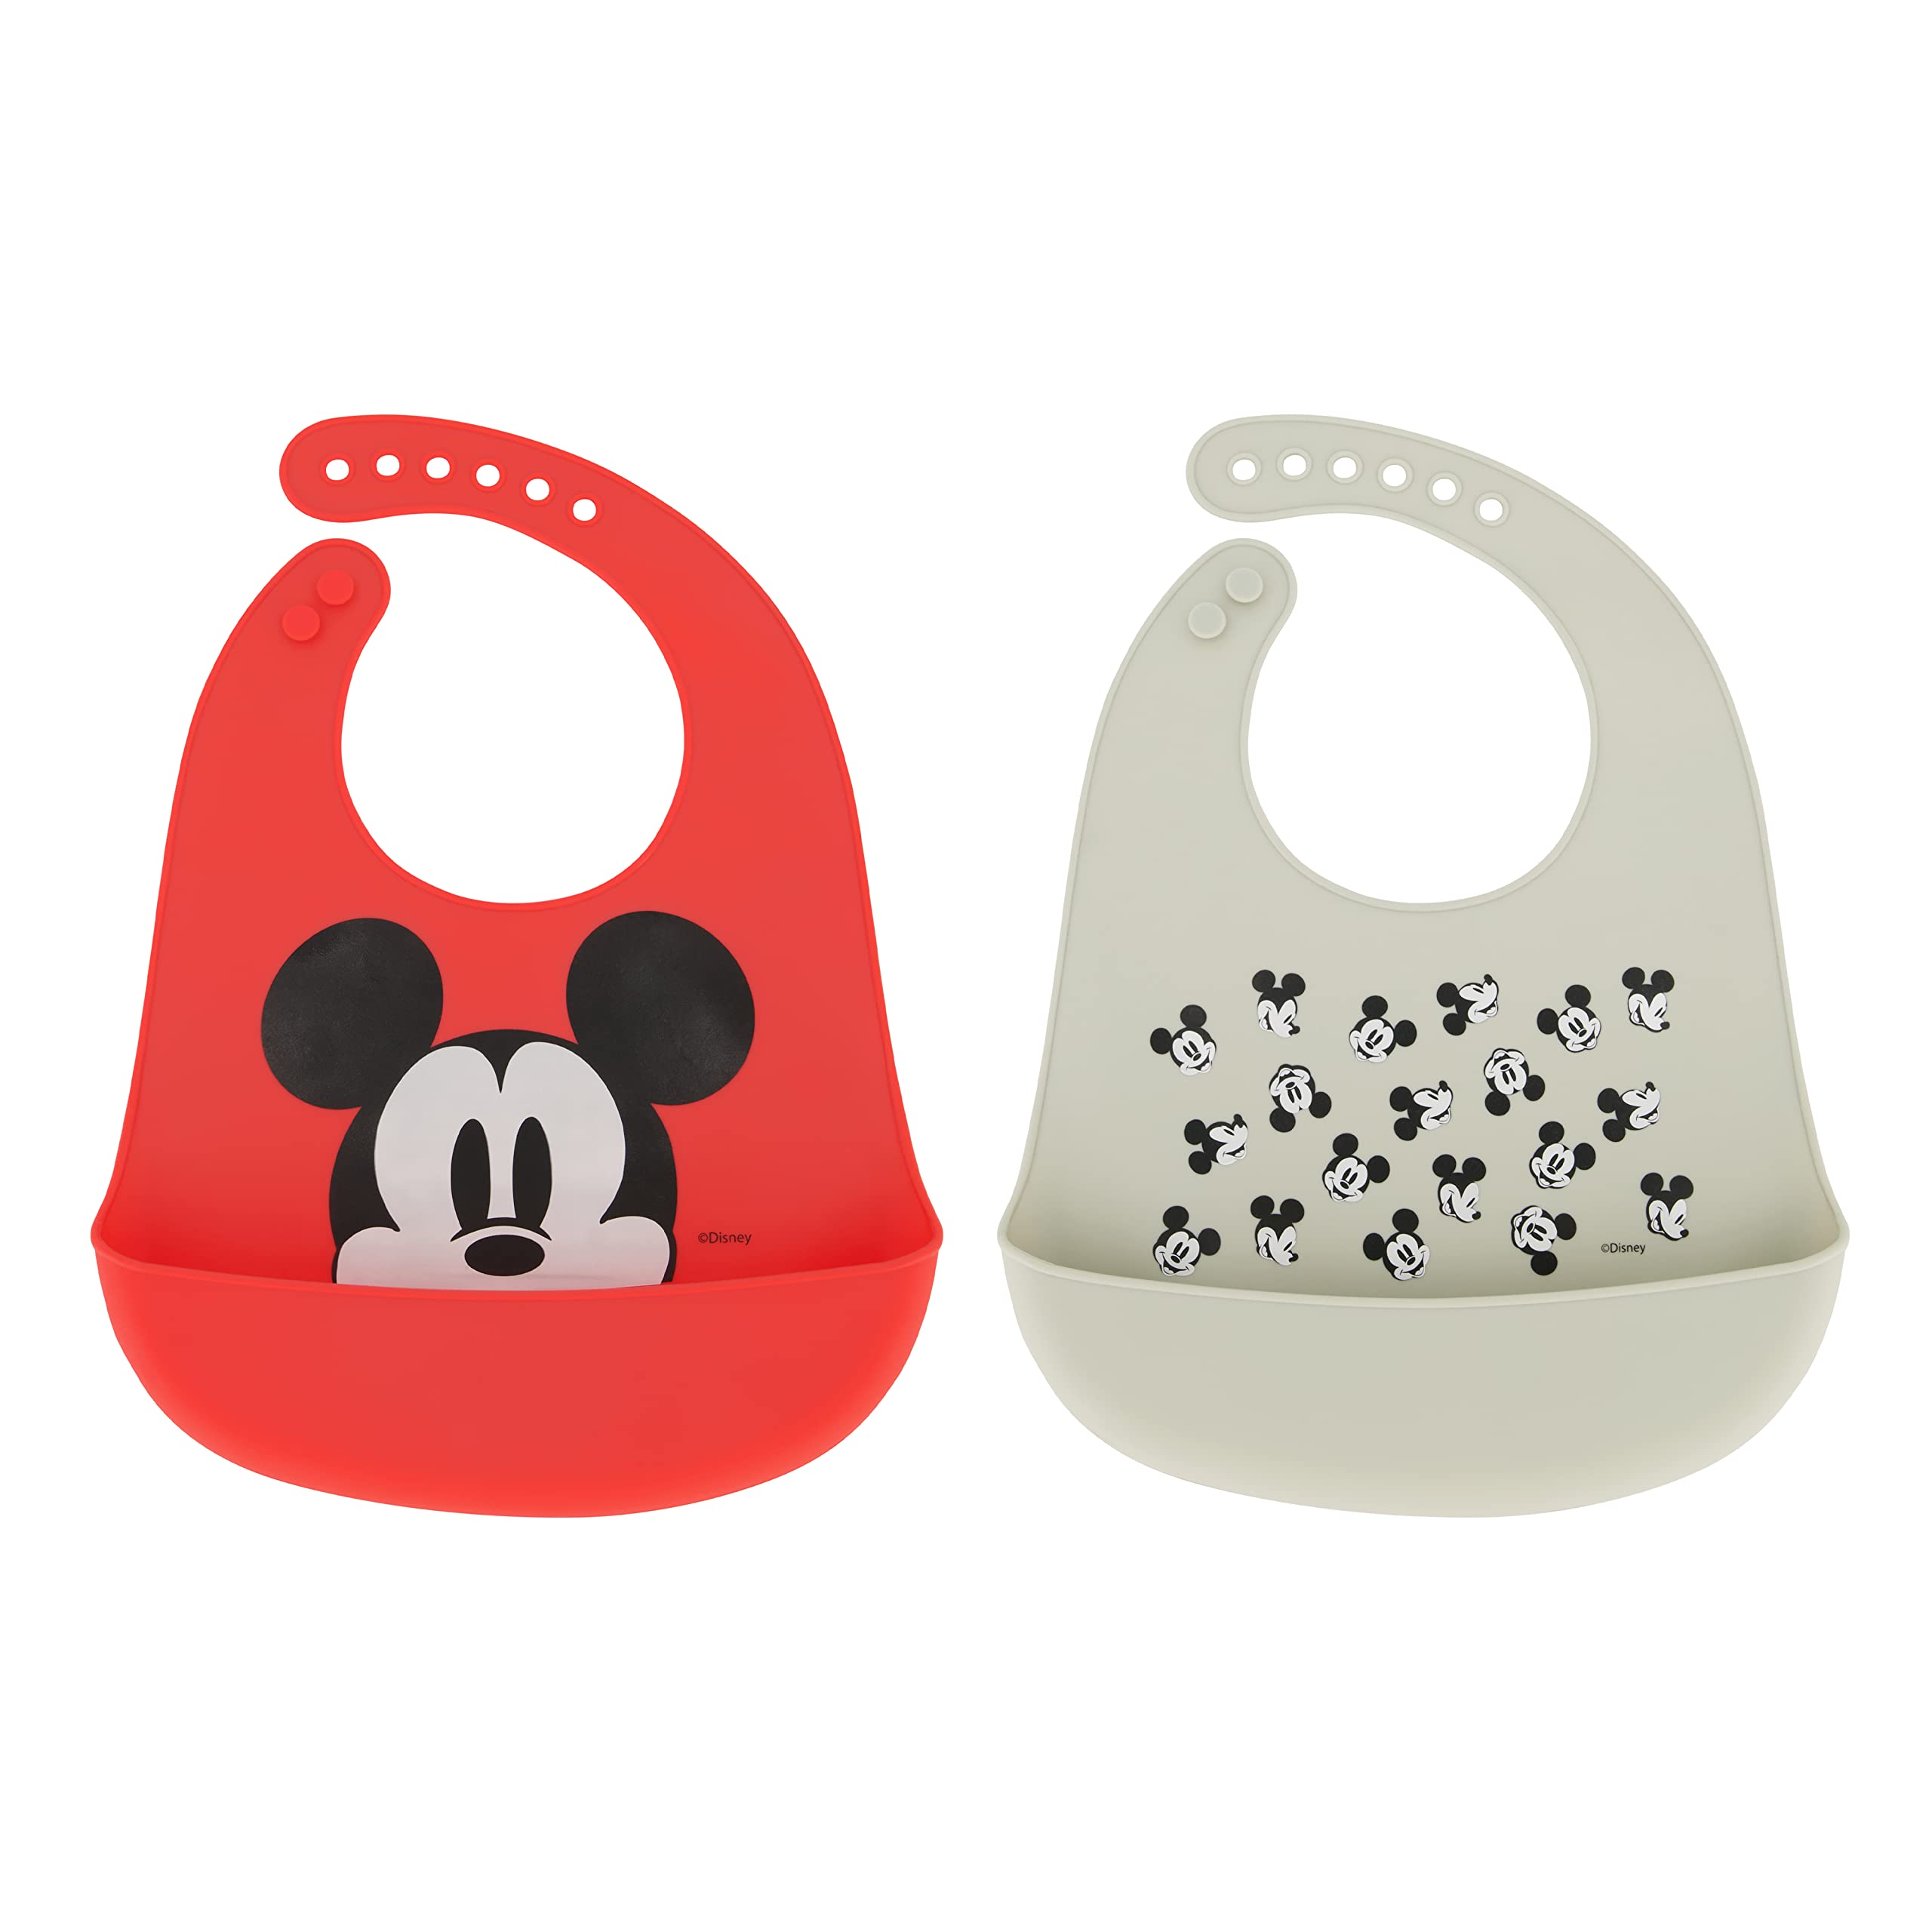 Disney 2-Pack Unisex Baby & Toddler Silicone Bibs with Food Catcher, Soft Waterproof Feeding Accessories